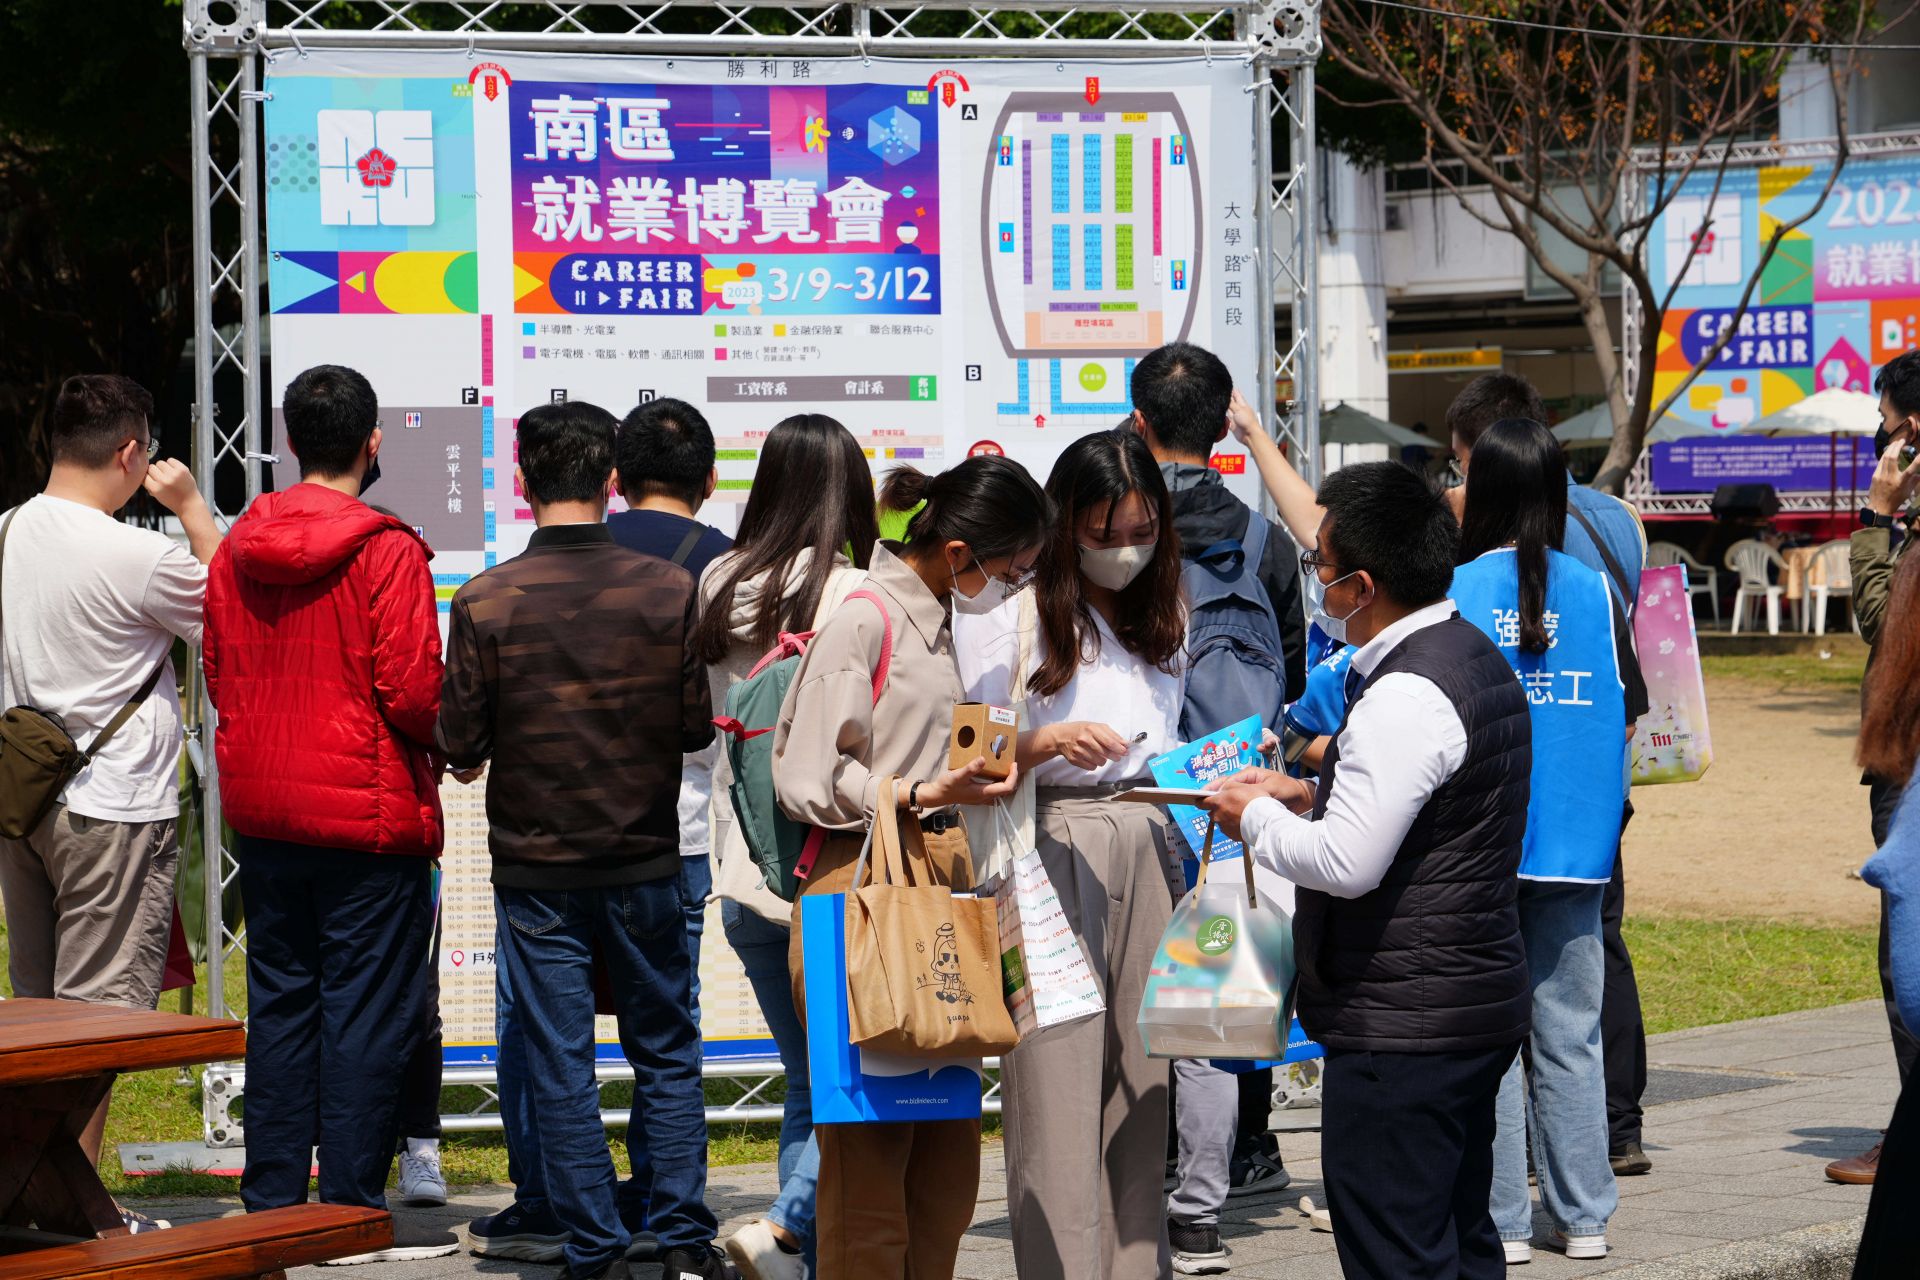 "2023 Career Fair in Southern Taiwan" at NCKU witnessed nearly 10000 people flocking in